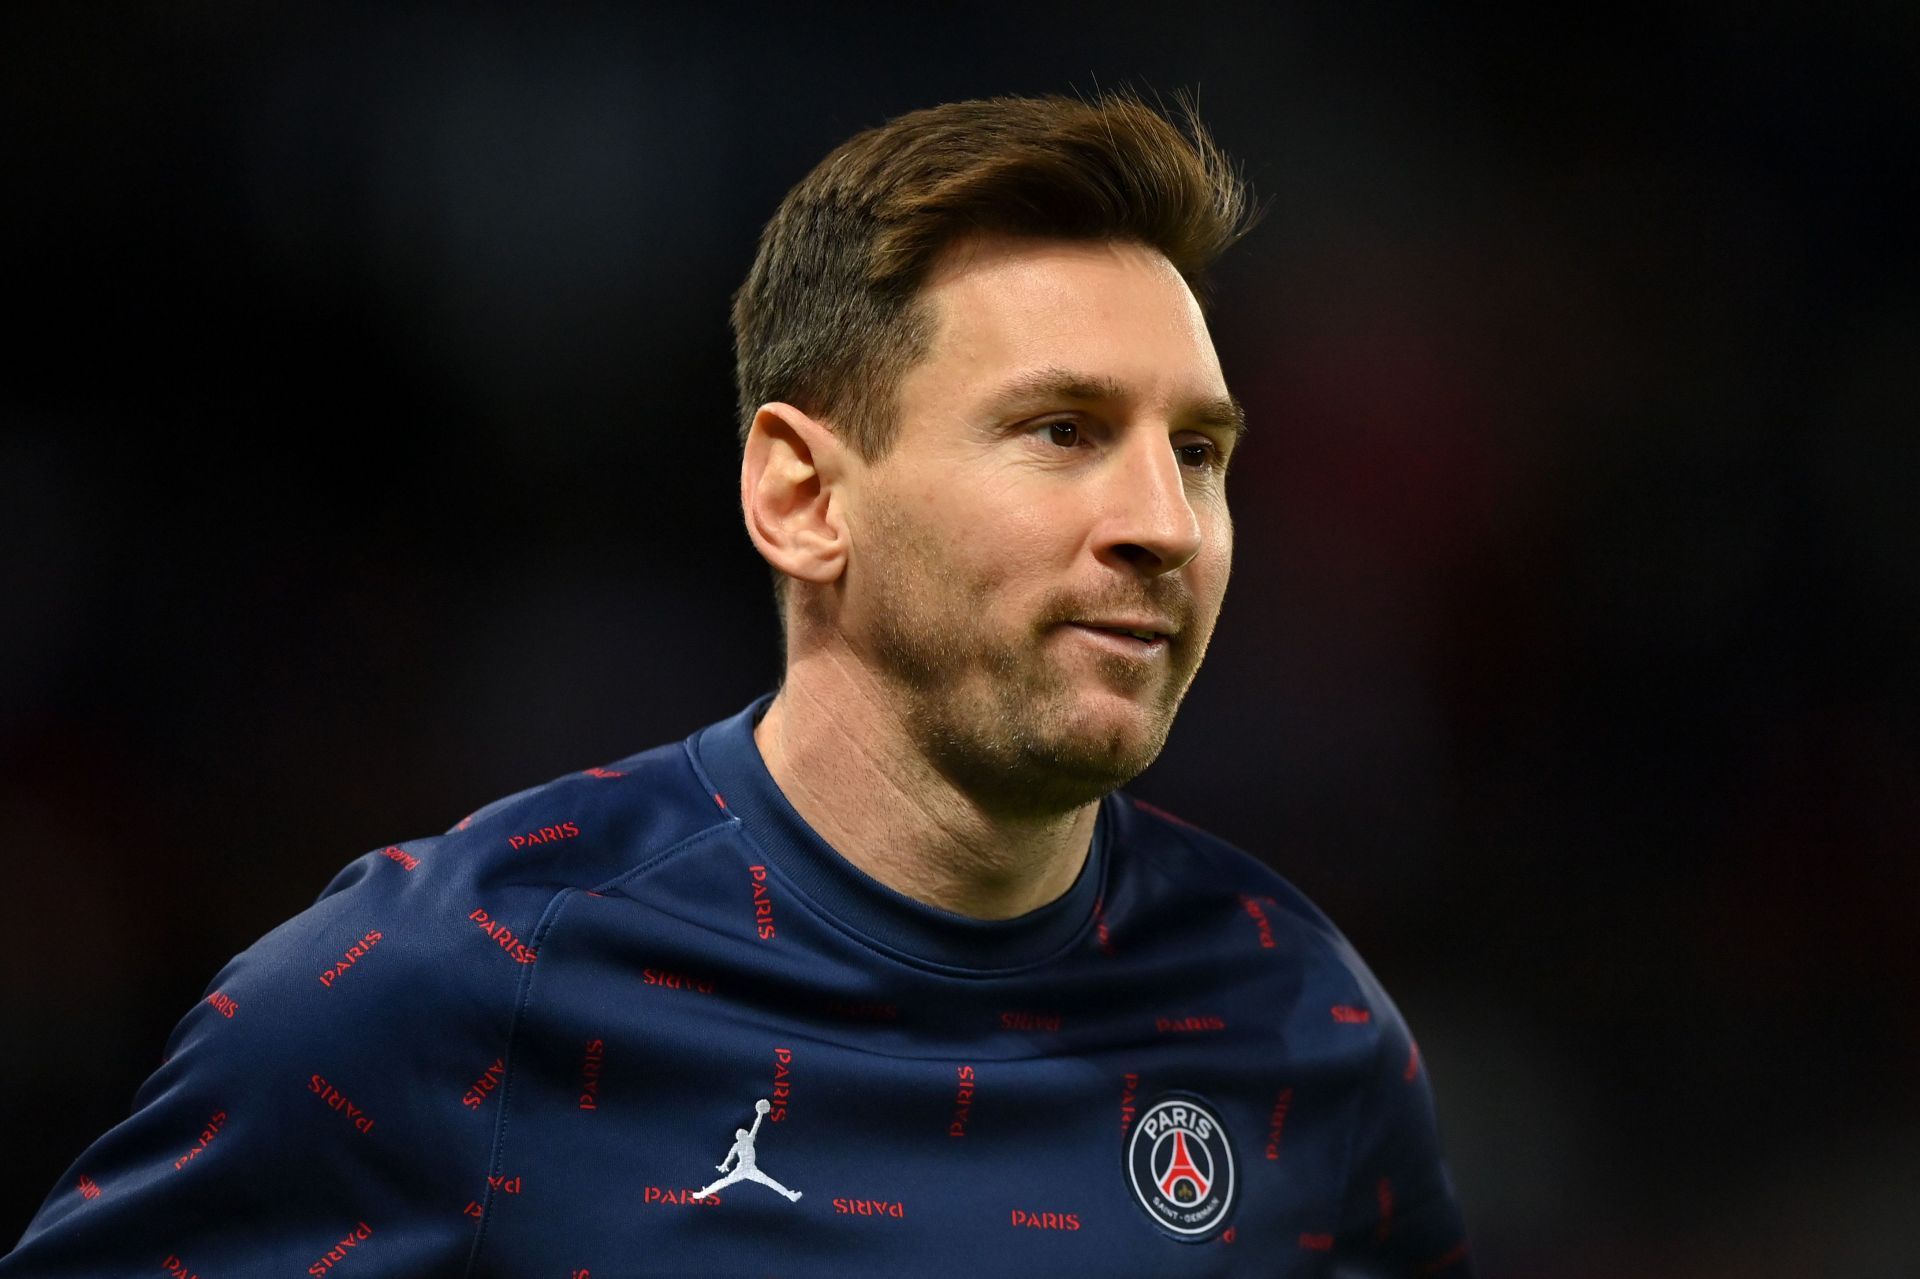 Lionel Messi signed a two-year contract with PSG after leaving Barcelona this summer